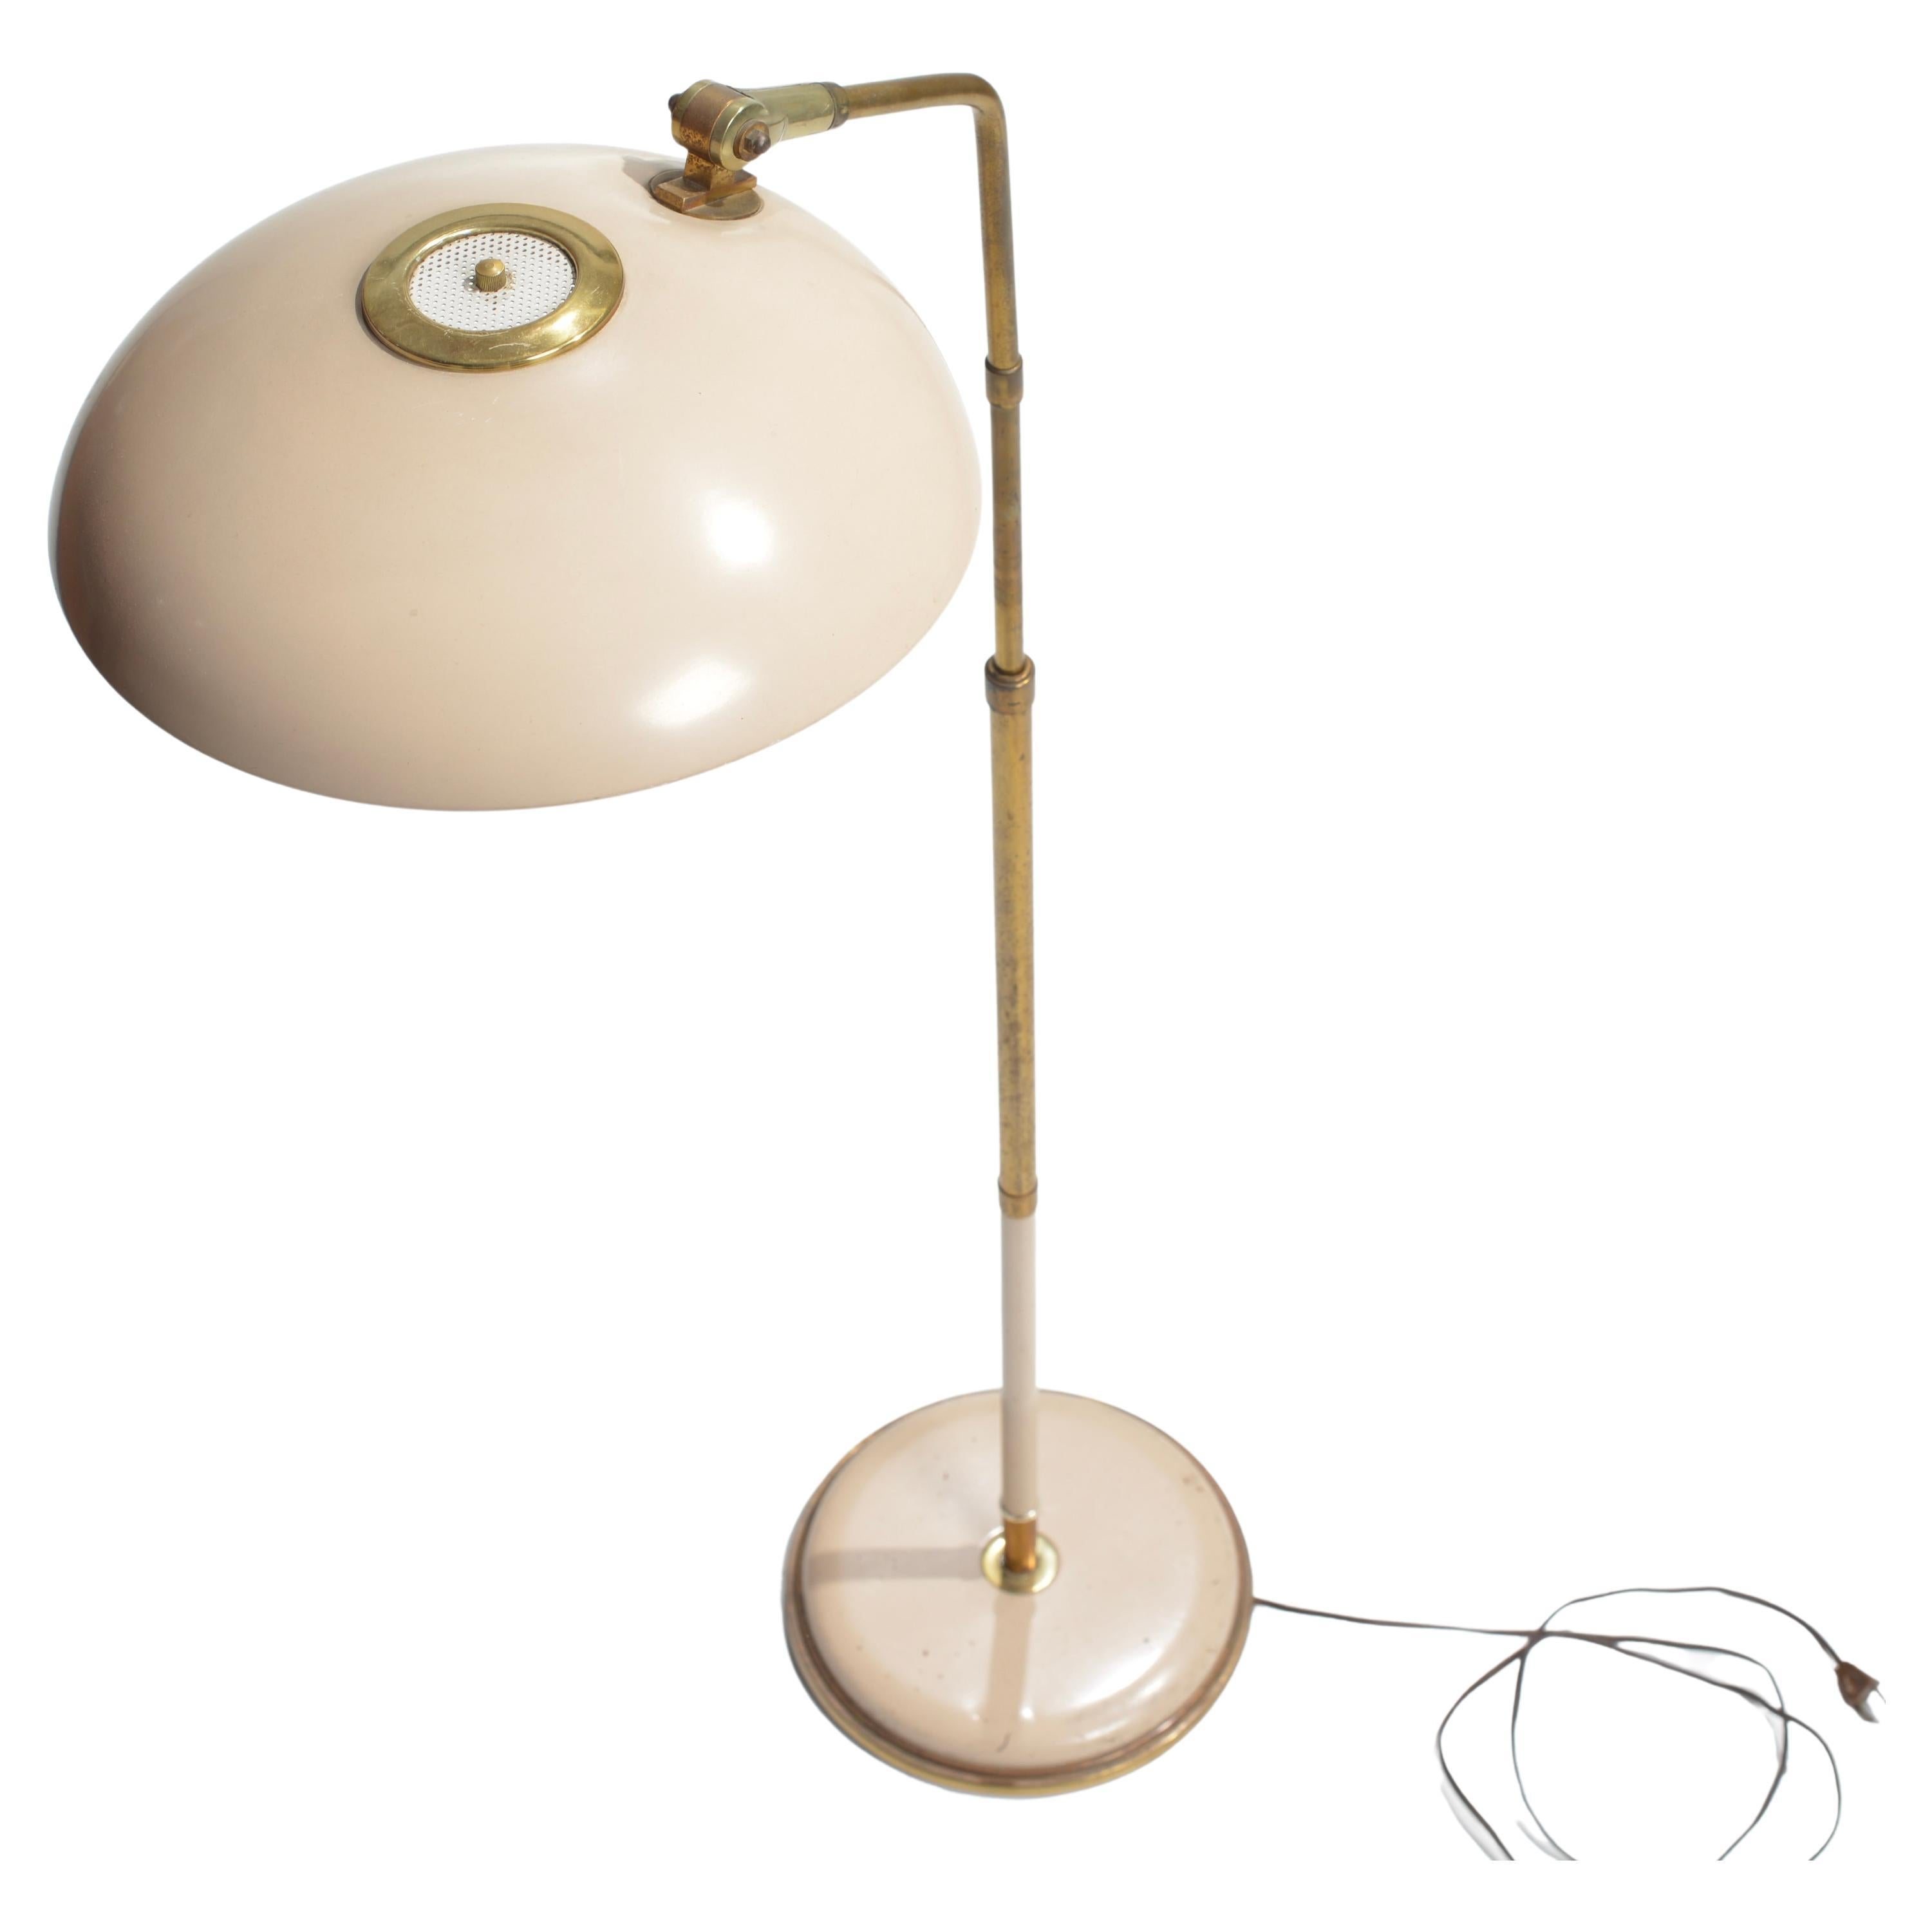 Rare adjustable floor, reading, lamp designed by Gerald Thurston for Lightolier. Iconic saucer shade lams in creme/tan color, with brass elements. The saucer shade tilts, while the total height is adjustable. Very rare!